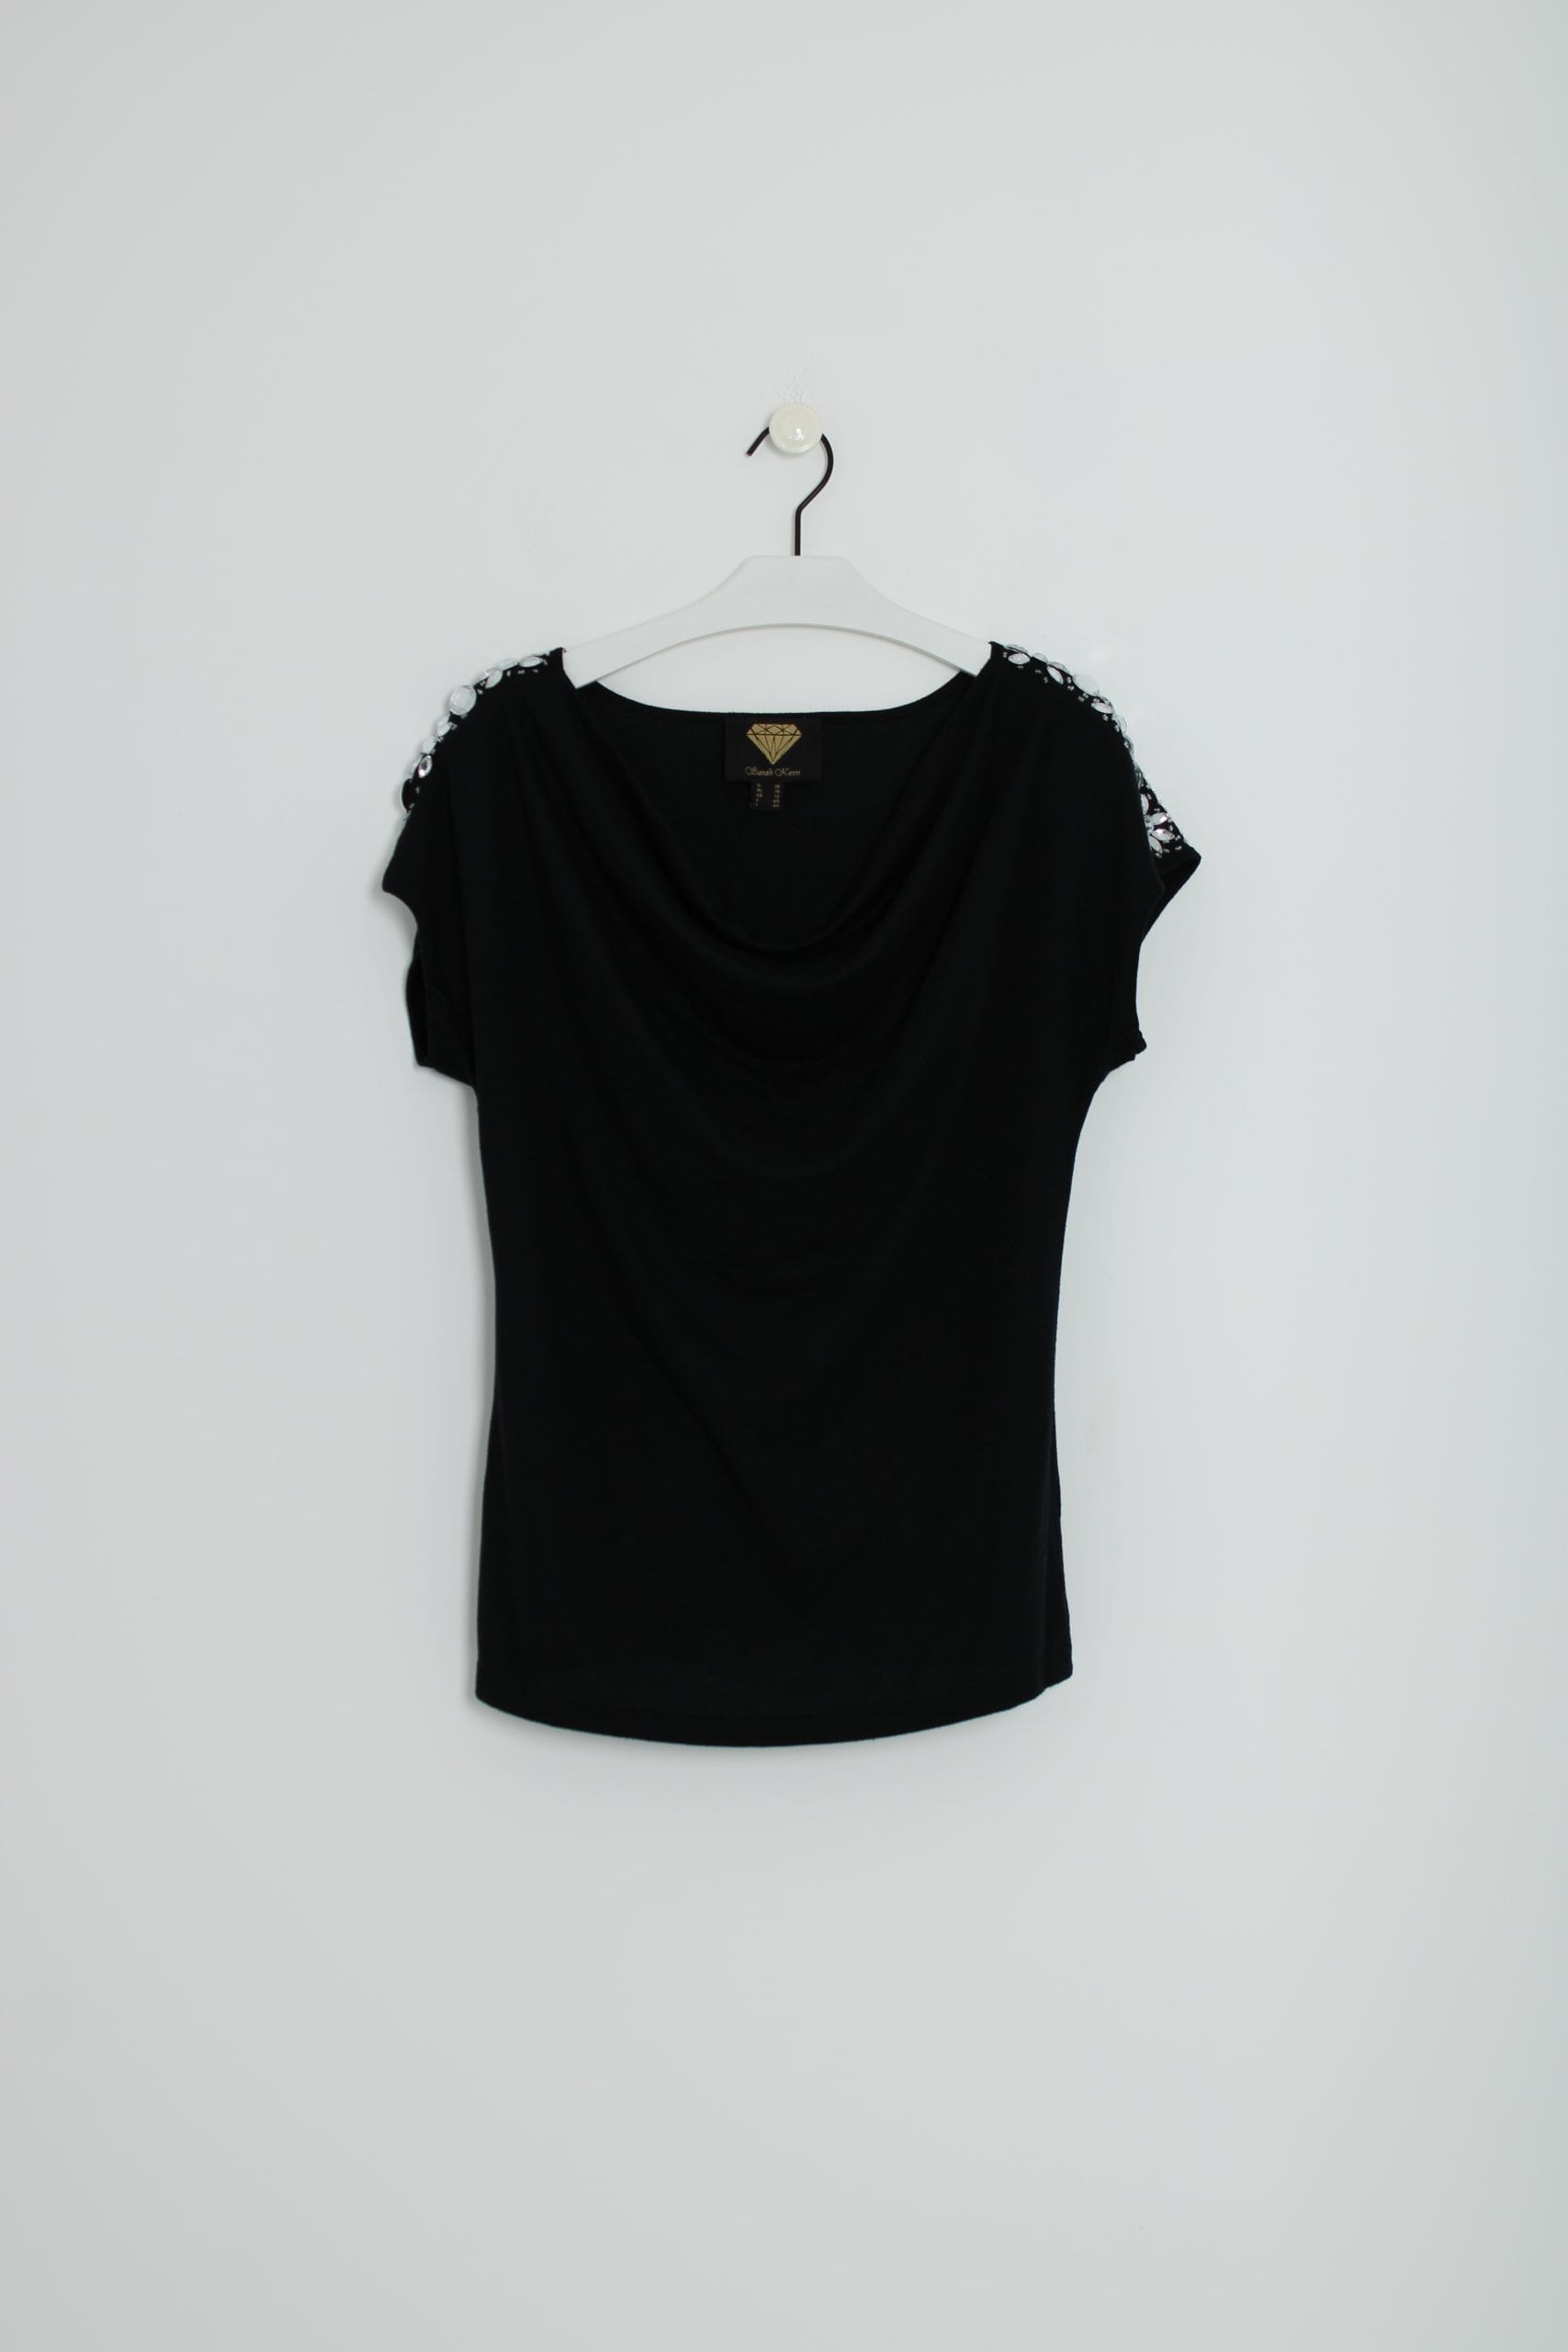 Cowl neck with jewels shoulder detail - Swapology